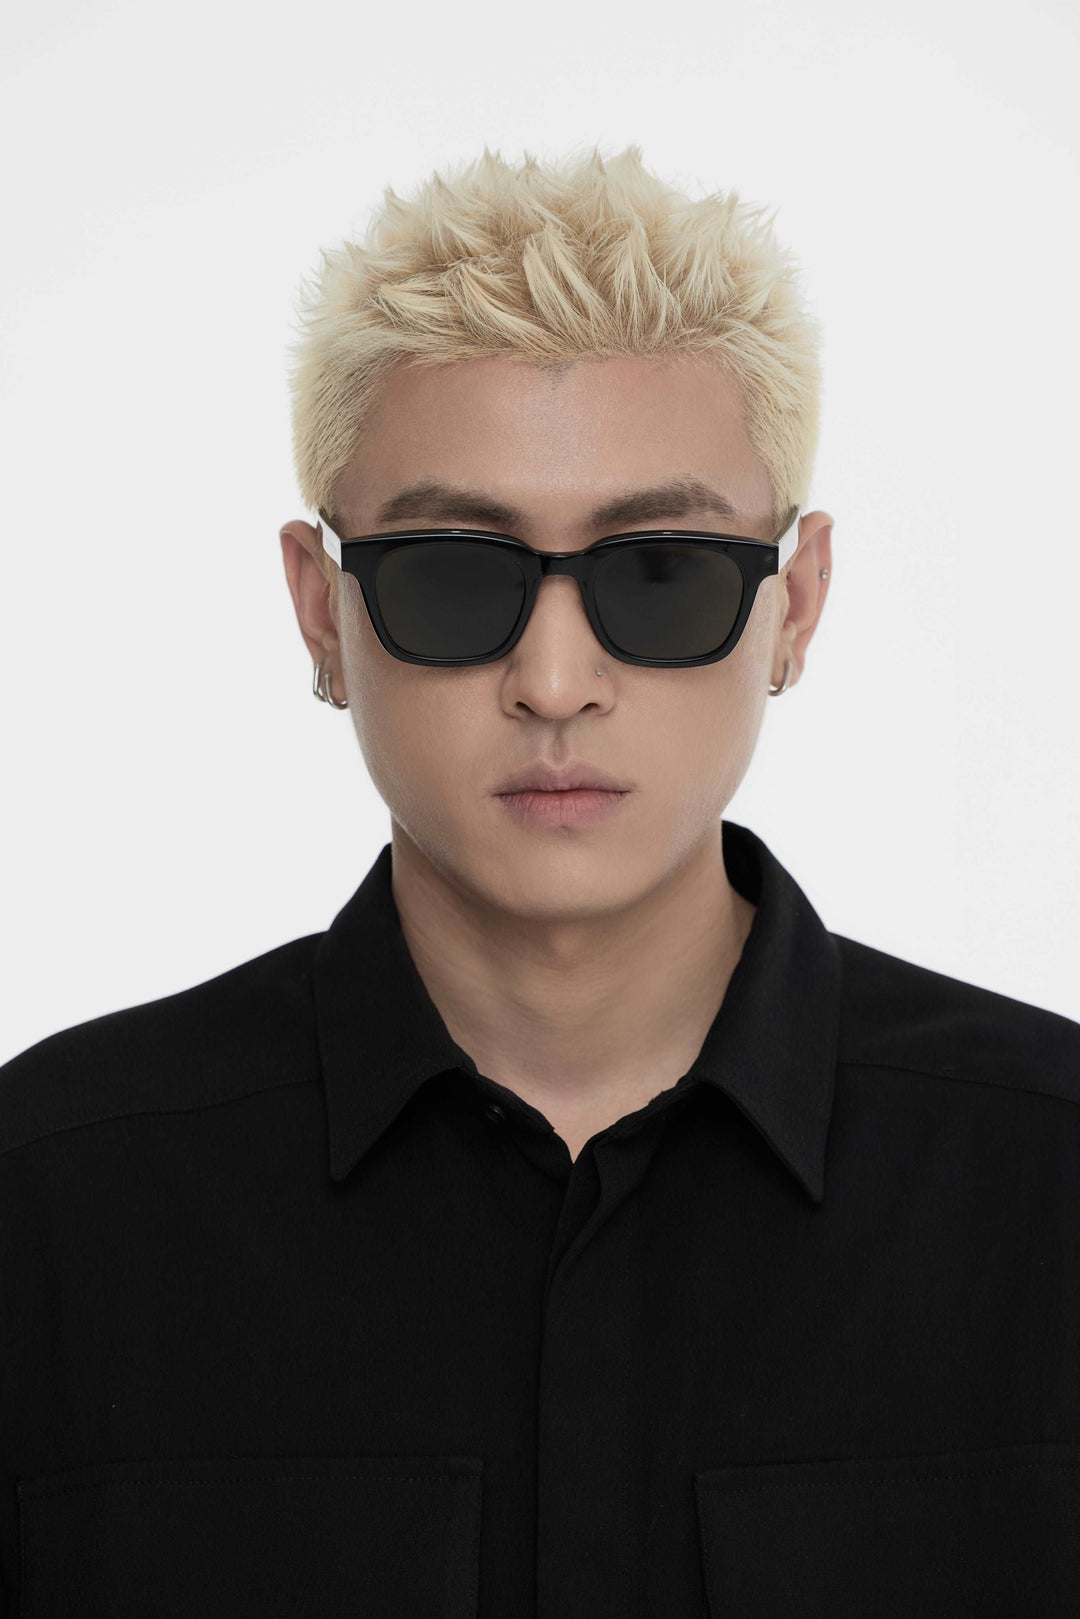 Male Model of his front face wearing Bubblegum in black sqaure High-quality sunglasses from Mercury Retrograde Daydream Collection 